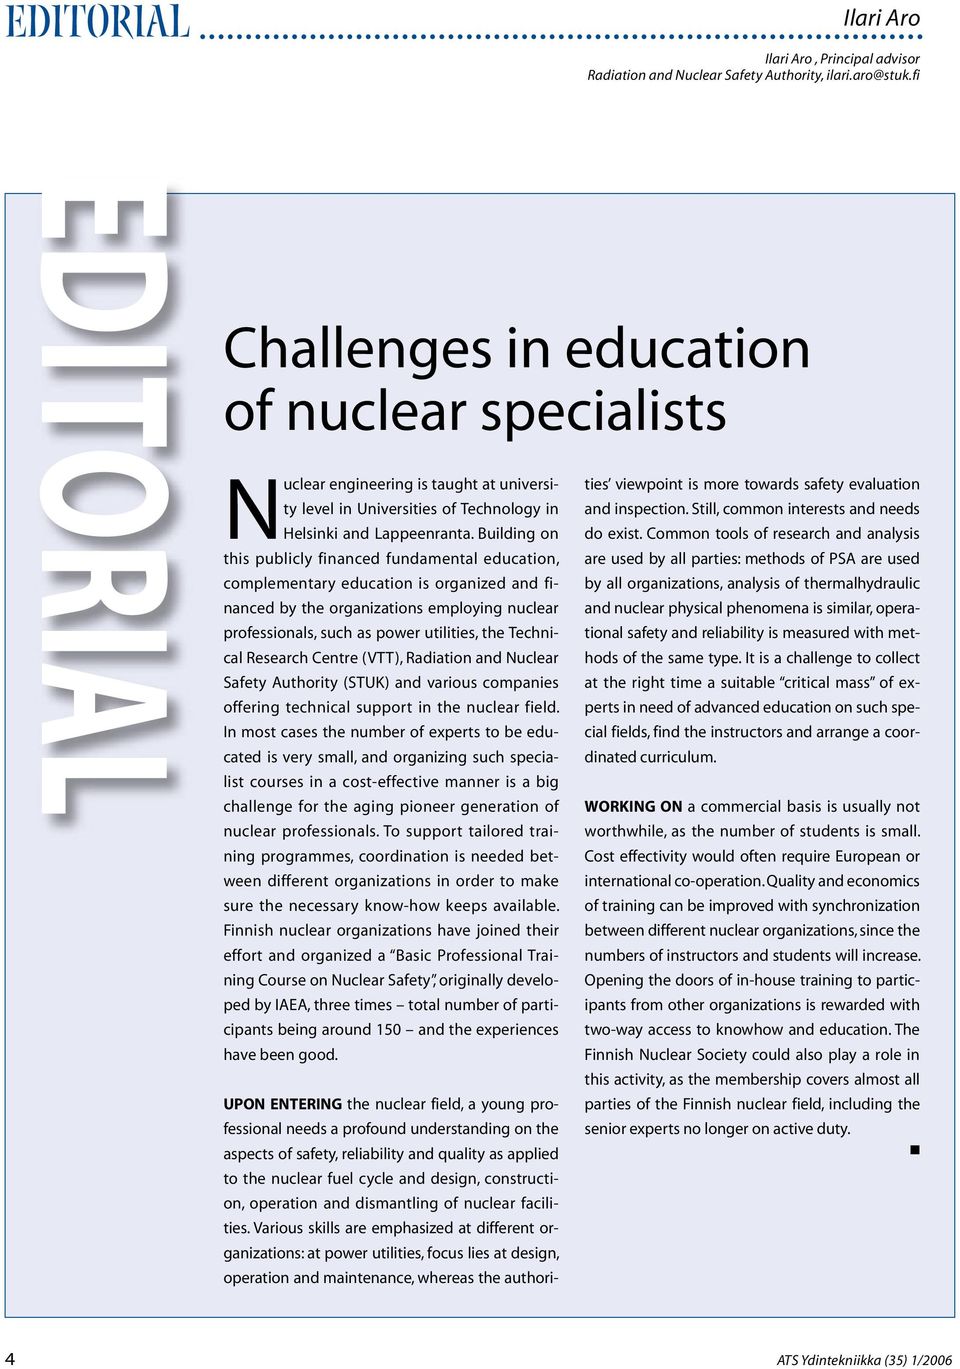 Building on this publicly financed fundamental education, complementary education is organized and financed by the organizations employing nuclear professionals, such as power utilities, the